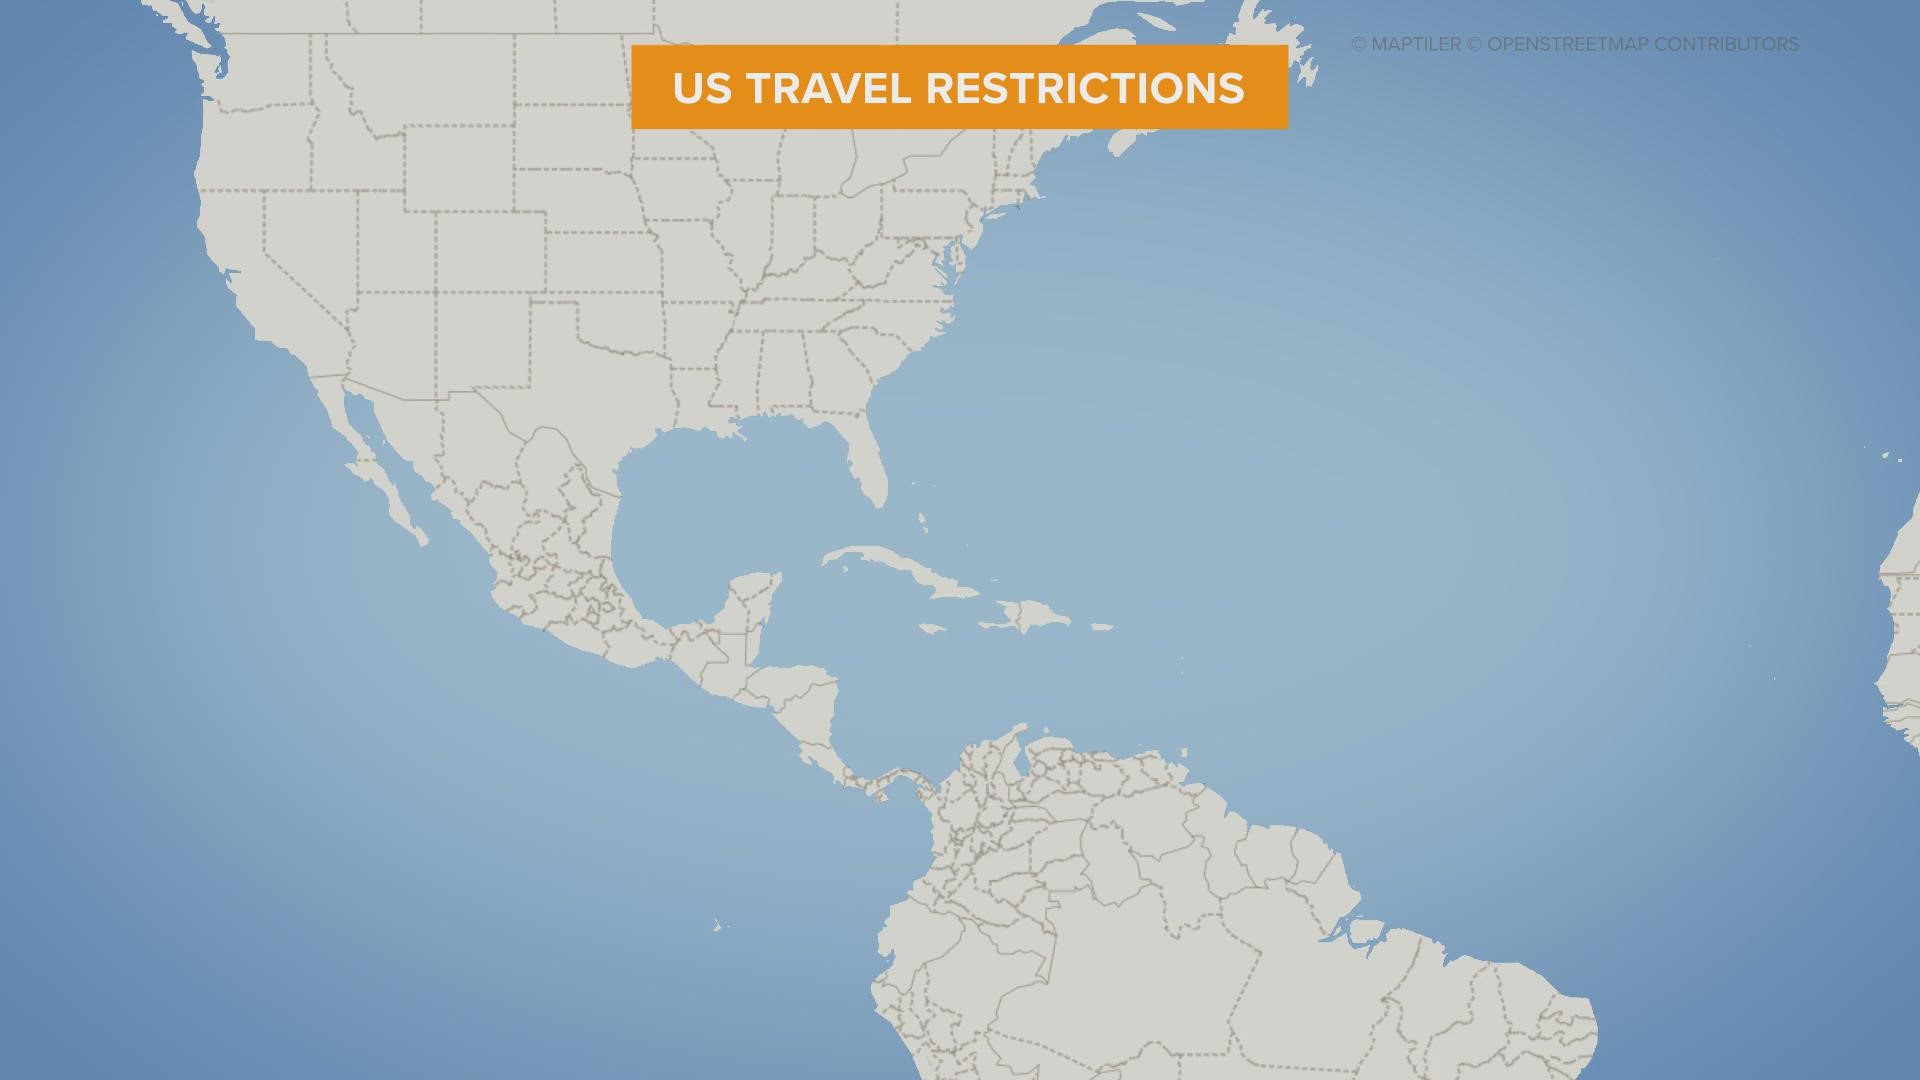 The United States and Canada joined the European Union and several other countries in instituting travel restrictions on visitors from southern Africa.